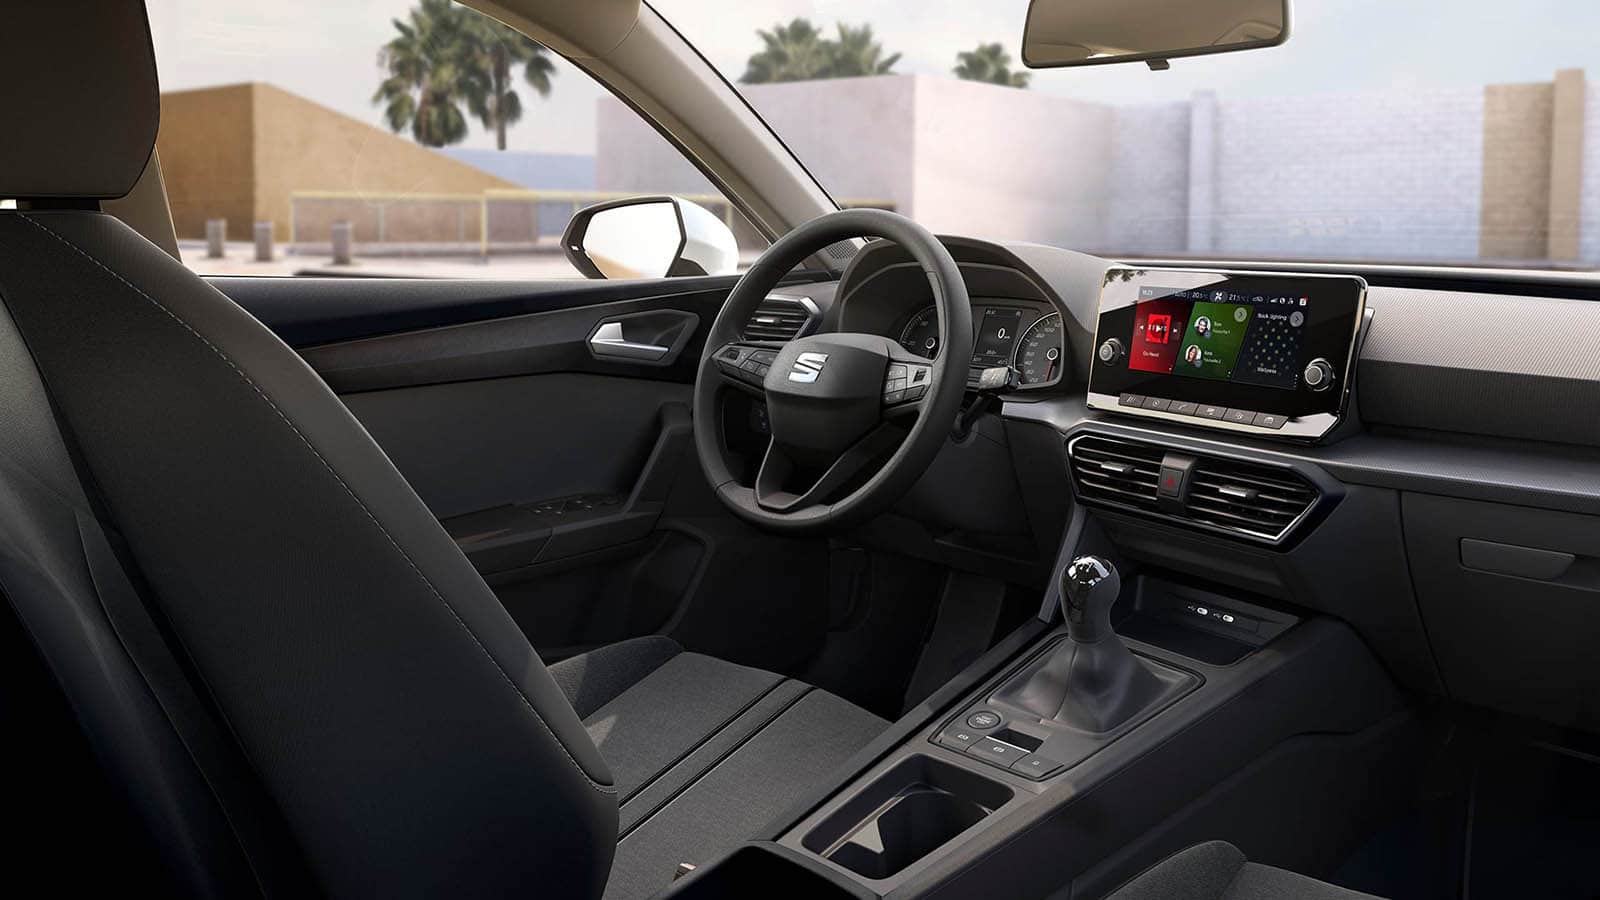 The SEAT León TSI, now from only € 17,200